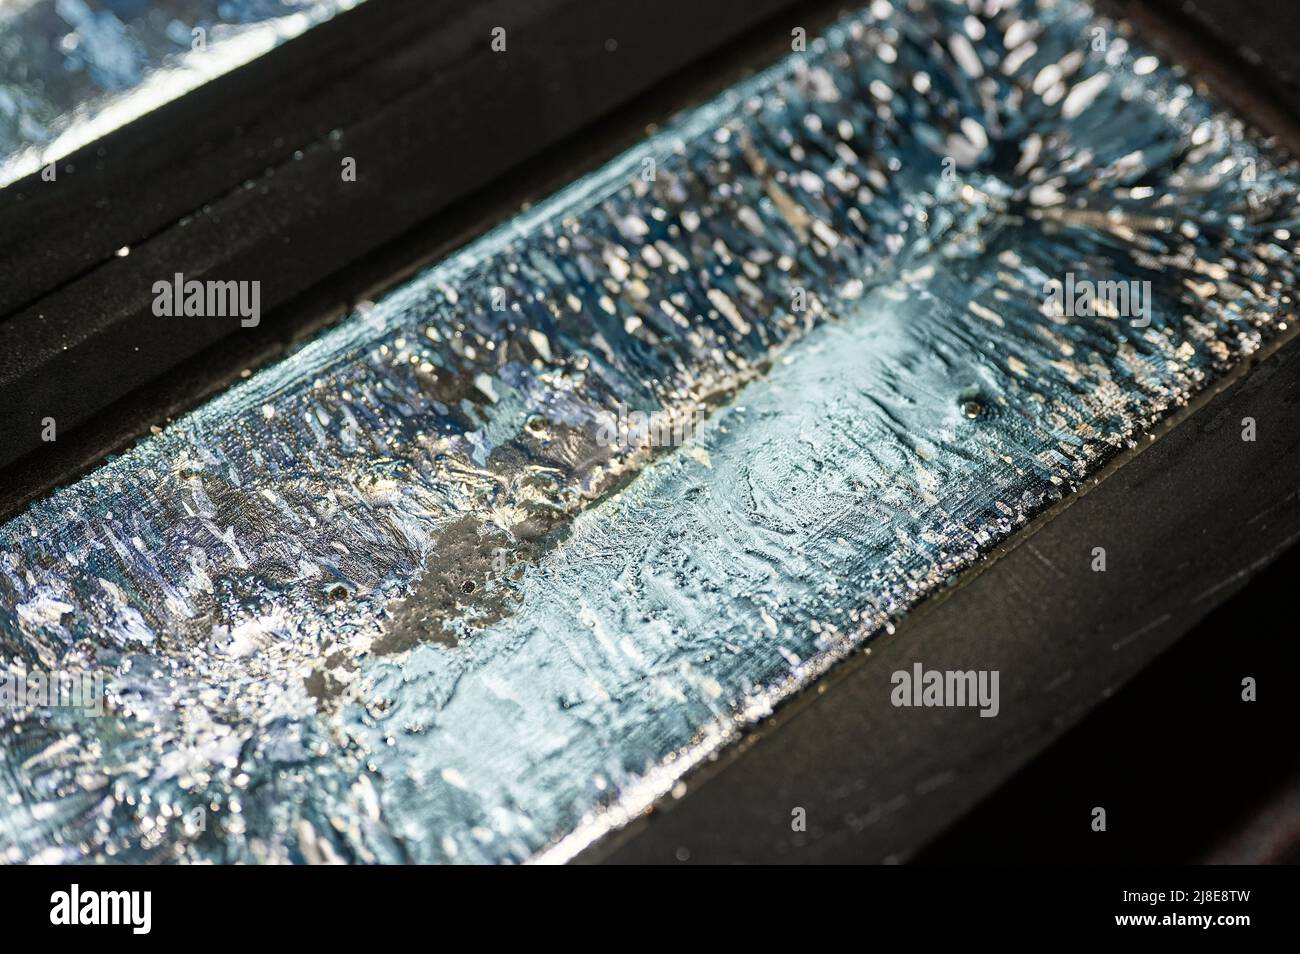 Biscuit of shiny silver cools down in graphite casting form Stock Photo